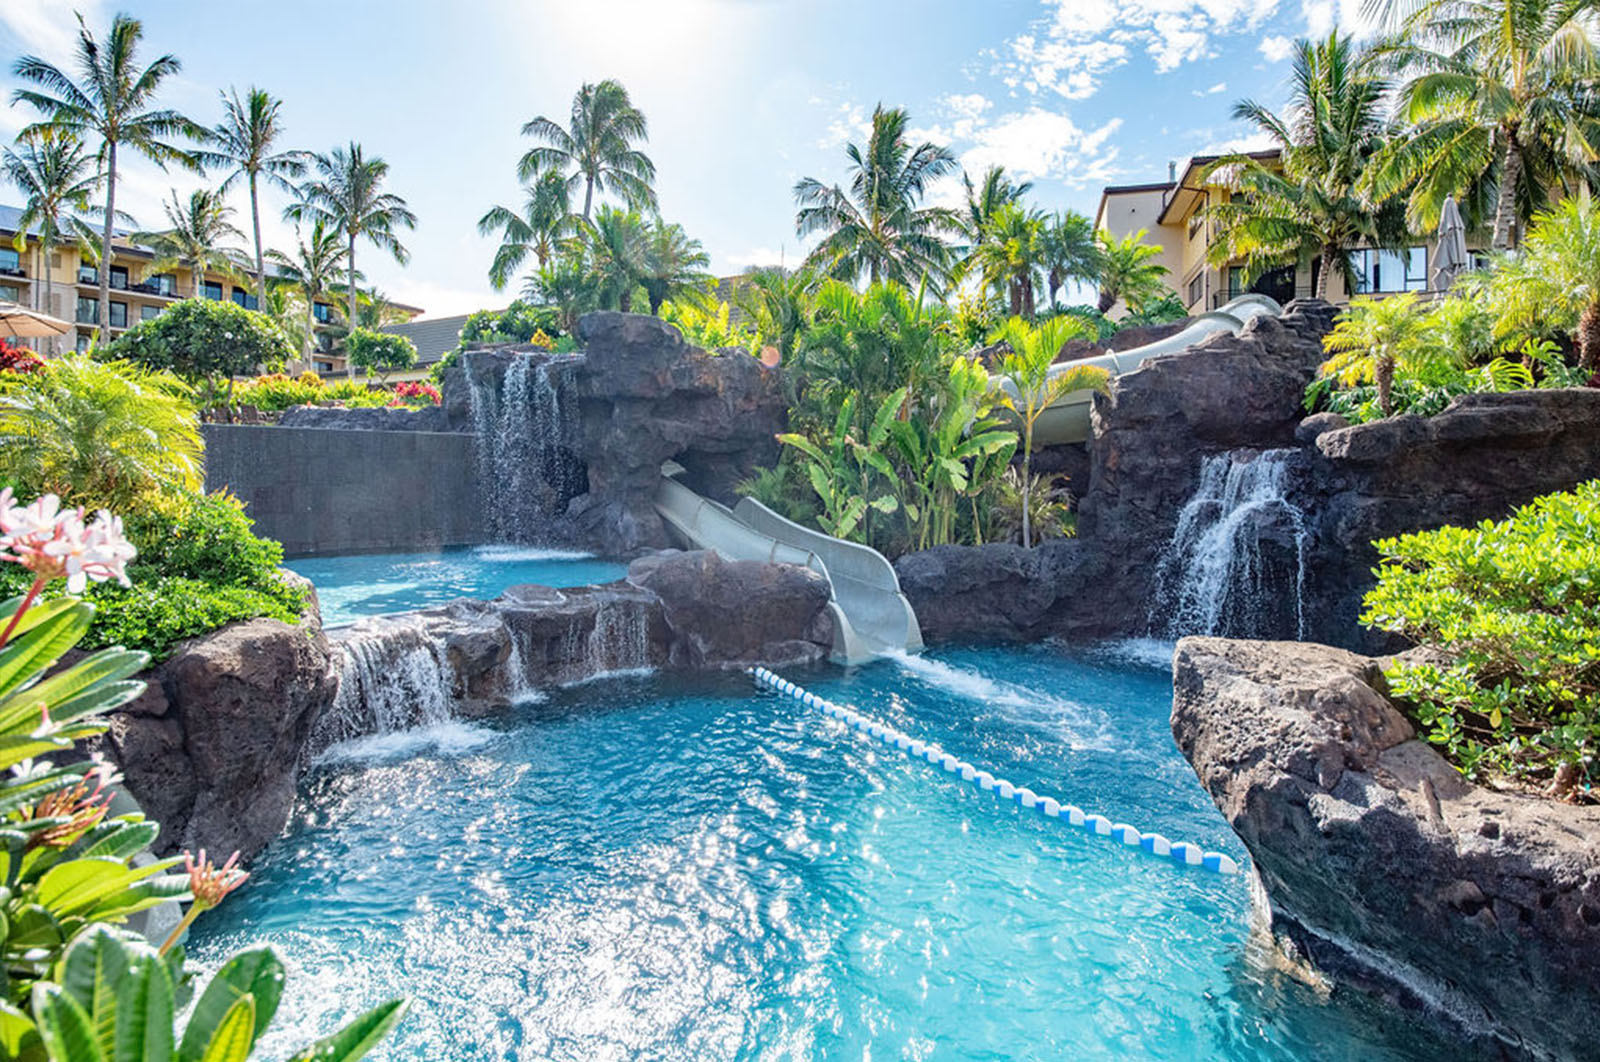 A thrilling waterslide through lava rock with waterfalls at a top-rated USA pool